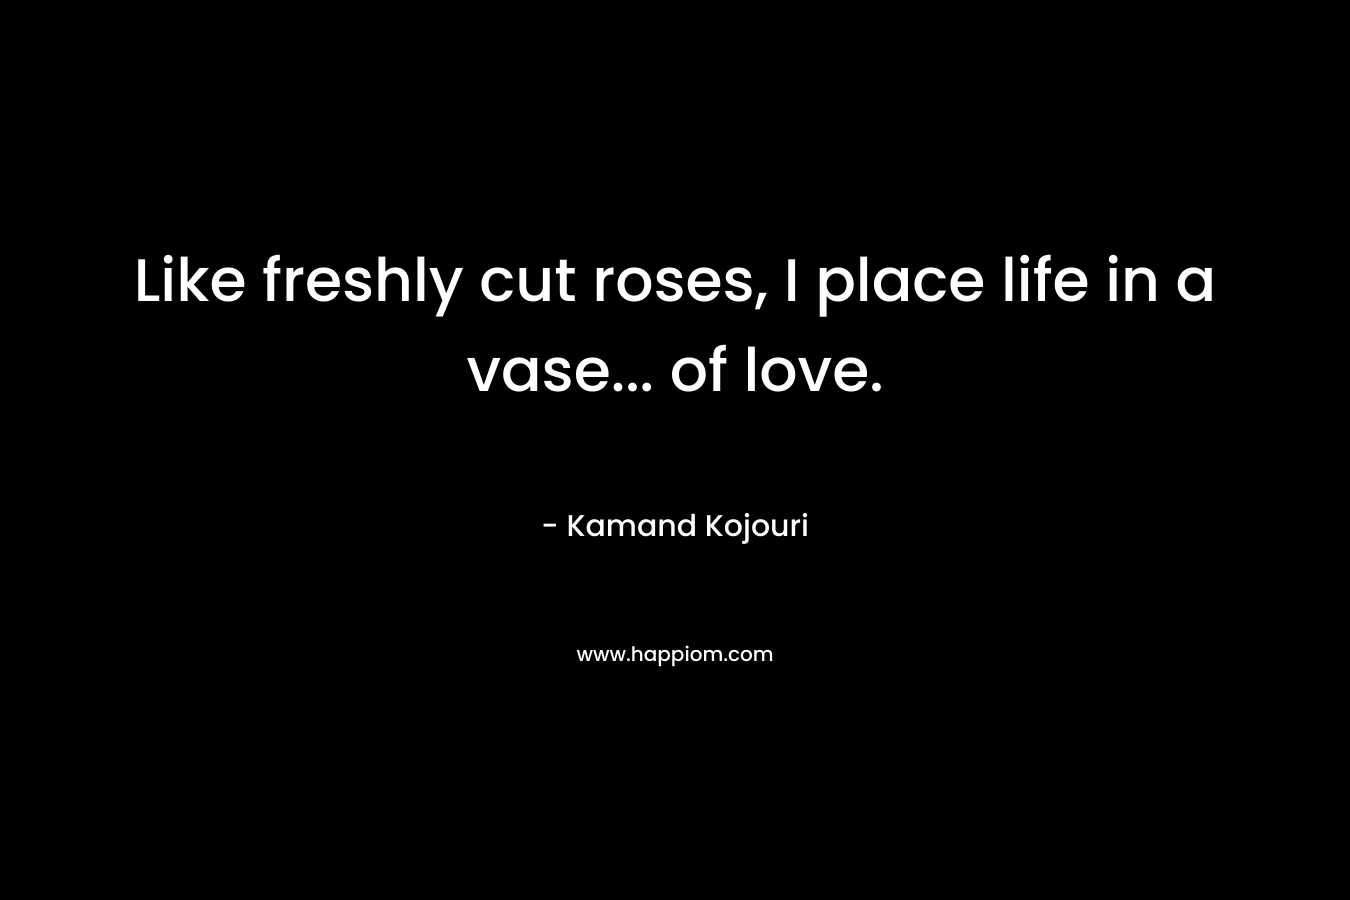 Like freshly cut roses, I place life in a vase... of love.